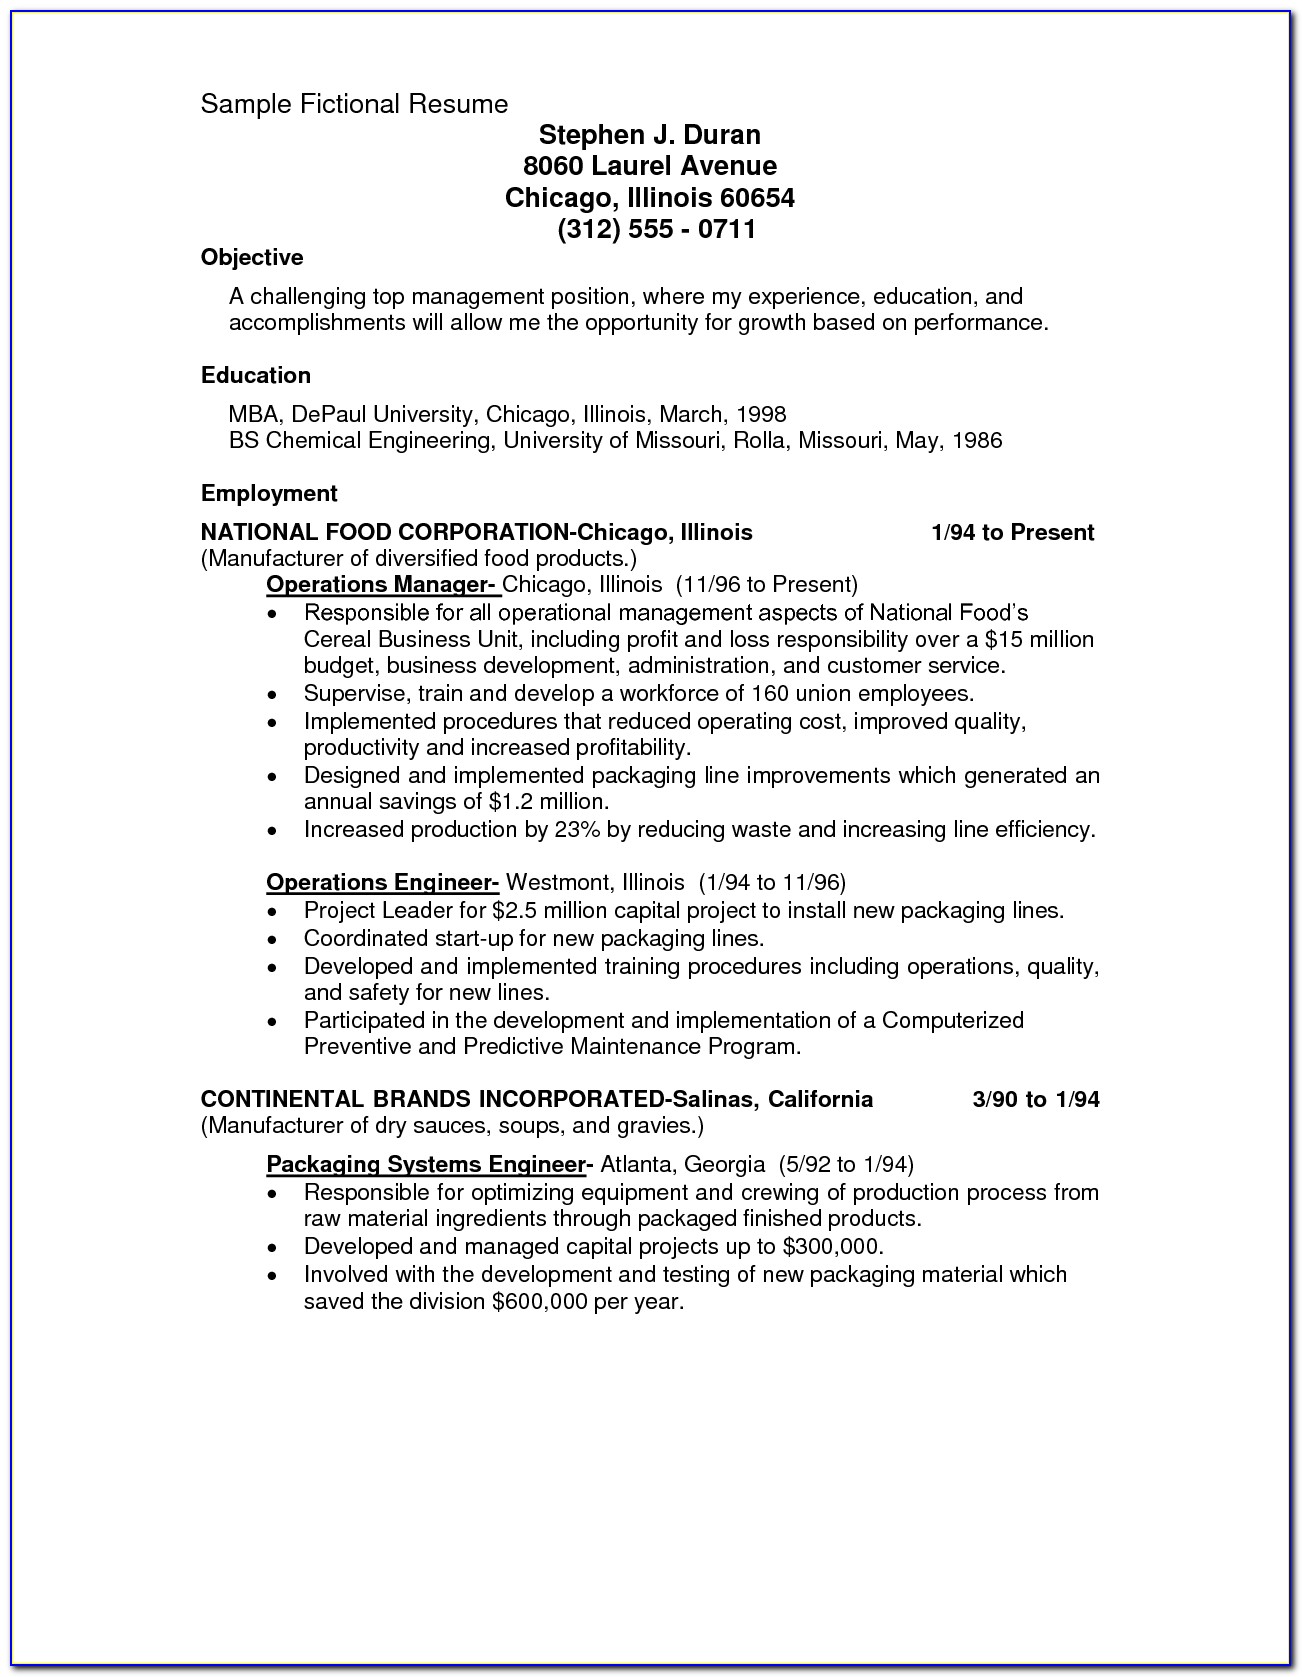 Resume Template For Journeyman Electrician